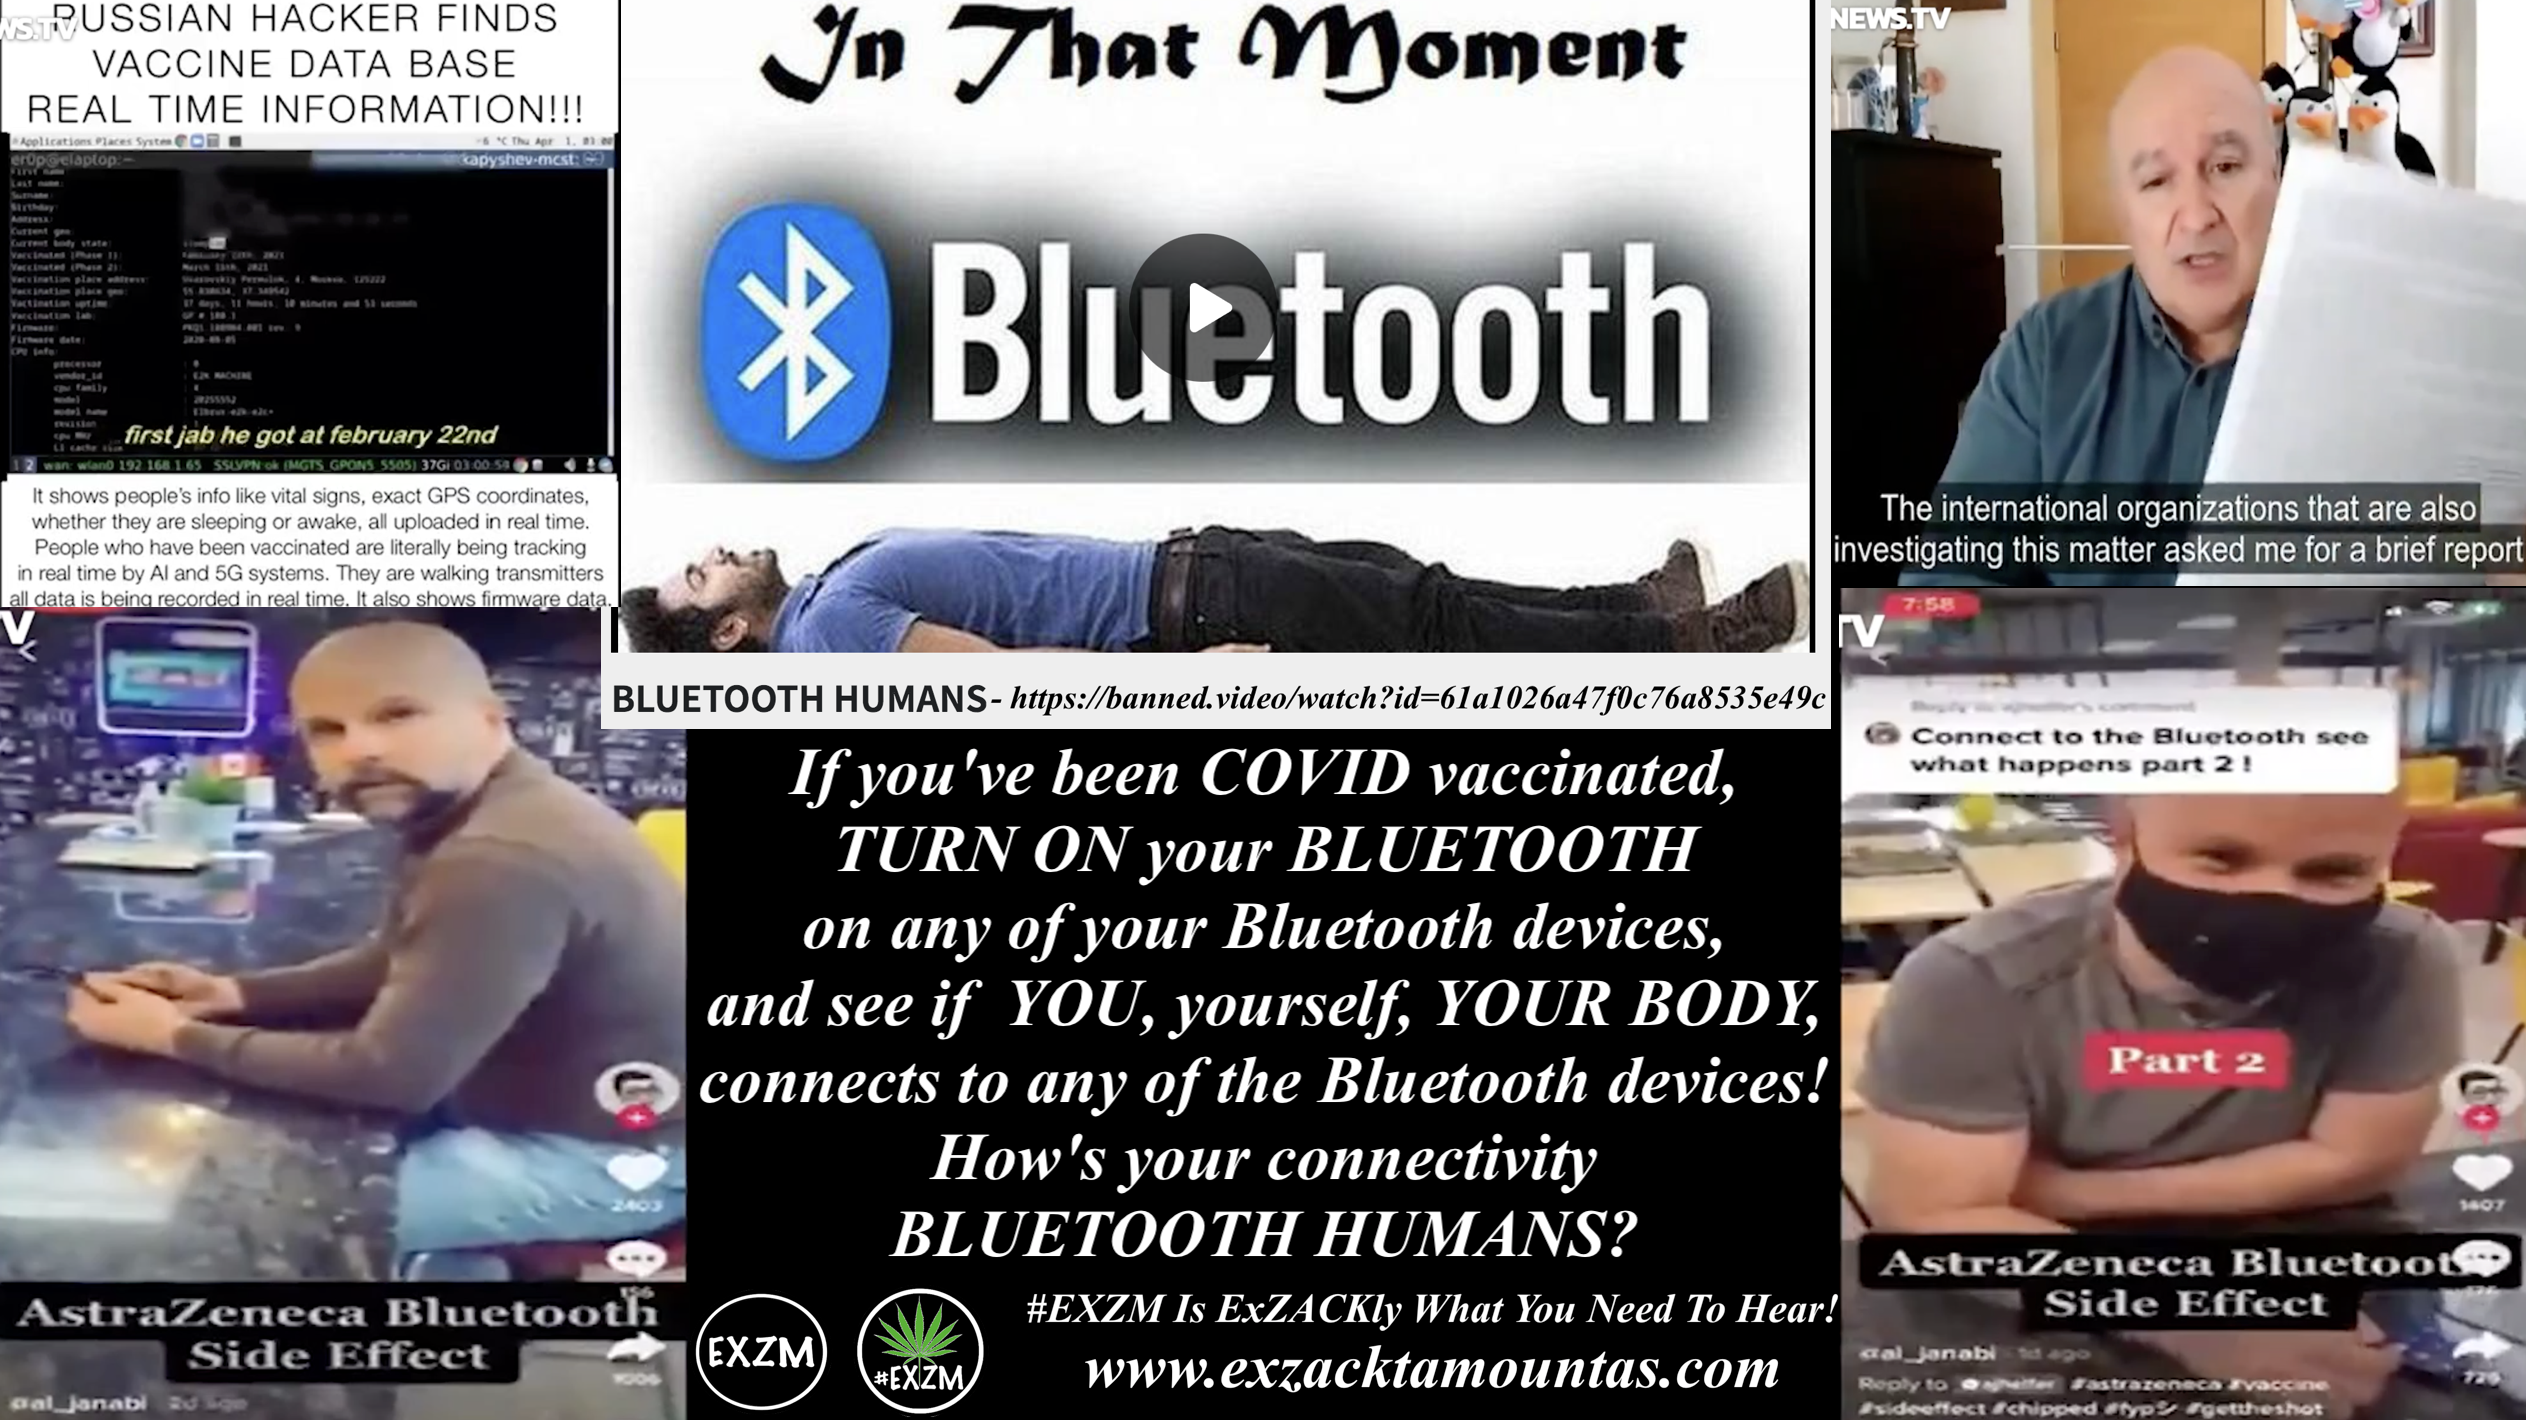 Hows your connectivity BLUETOOTH HUMANS EXZM Zack Mount November 28th 2021